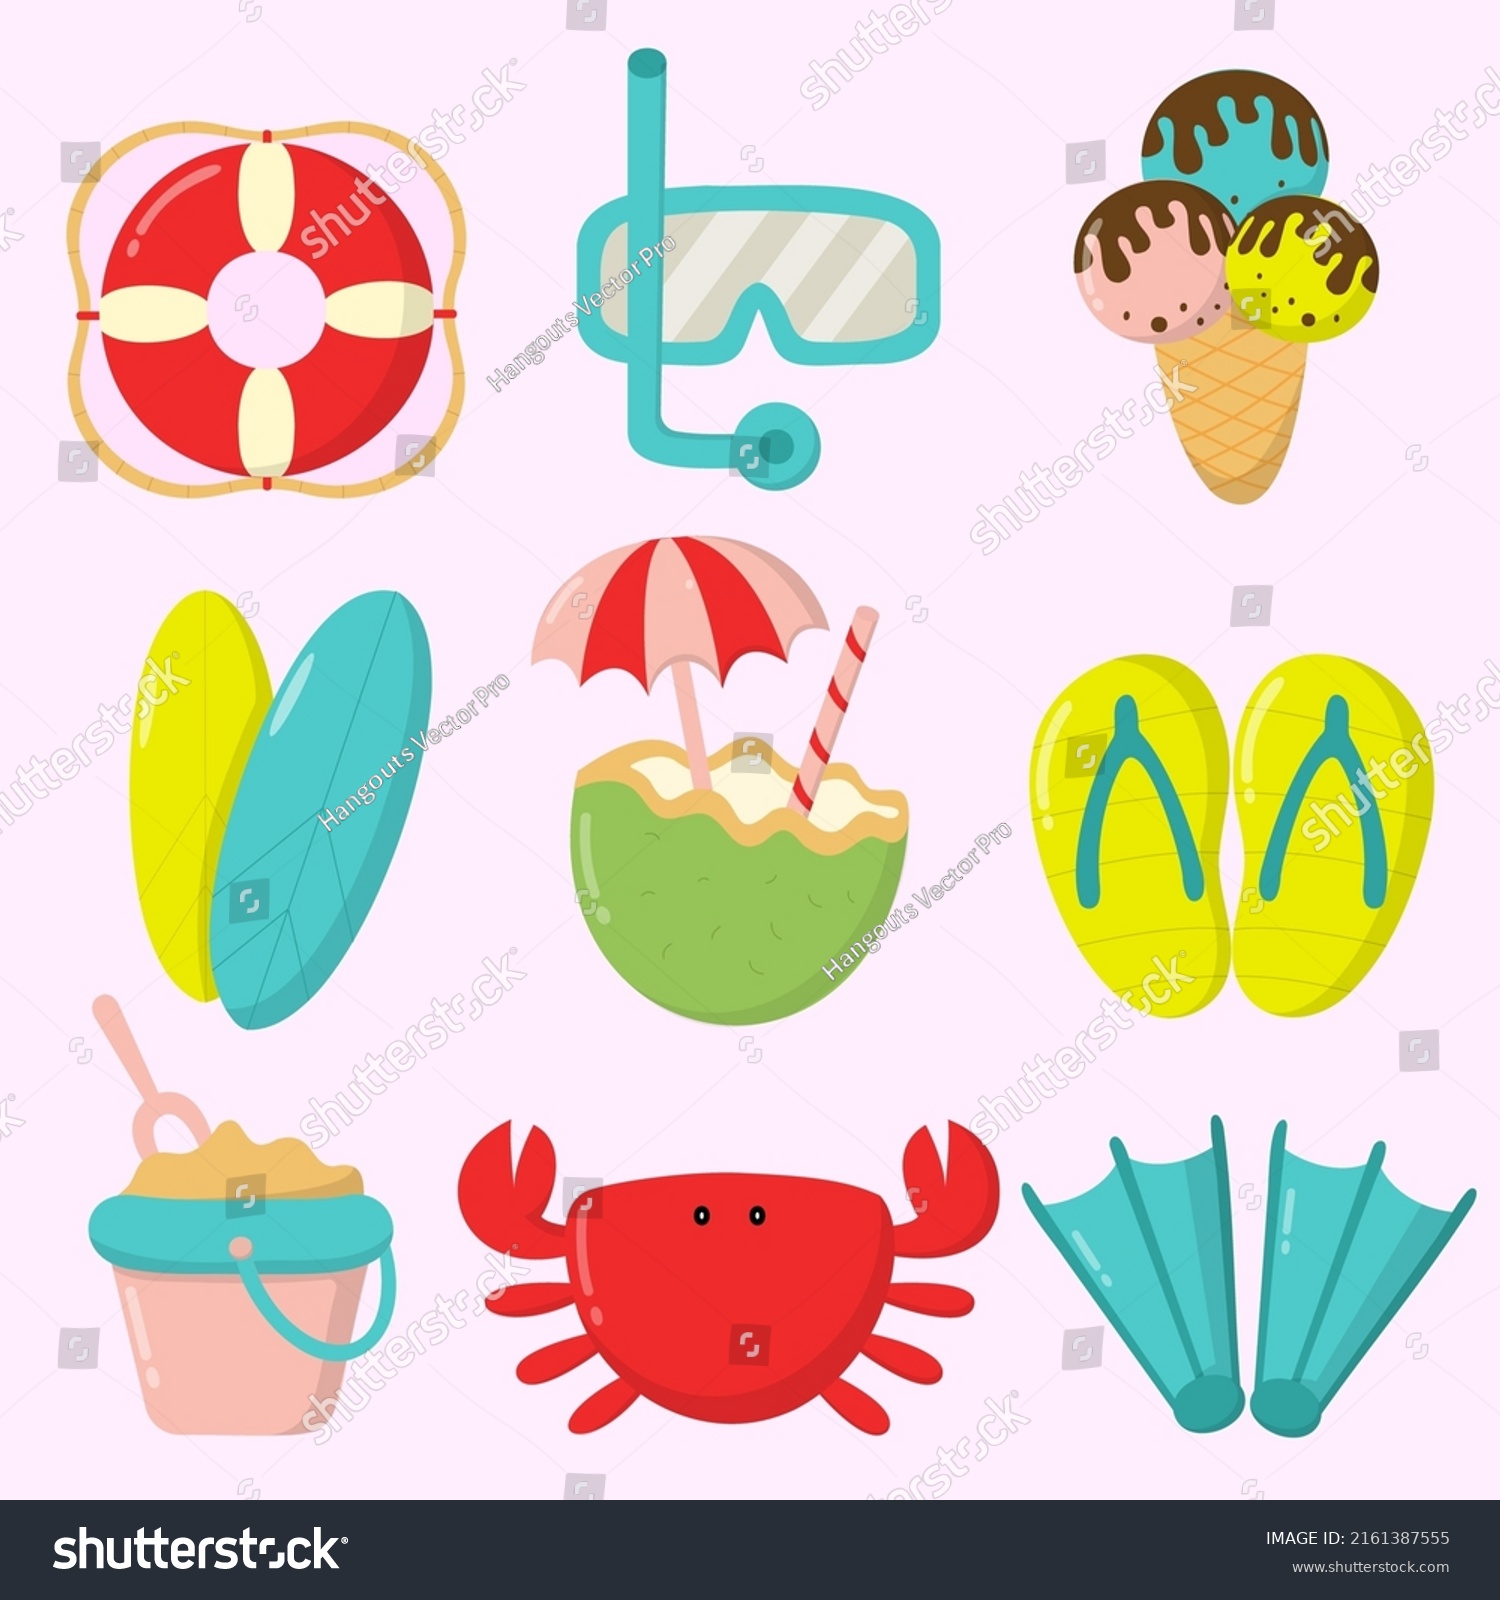 SVG of Summer holiday traveling and tourism elements. Colorful touristic objects like lifebuoy, snorkel, ice cream, surfboard, coconut, flip flops, sand bucket, crab, fins. Cartoon flat vector illustration svg